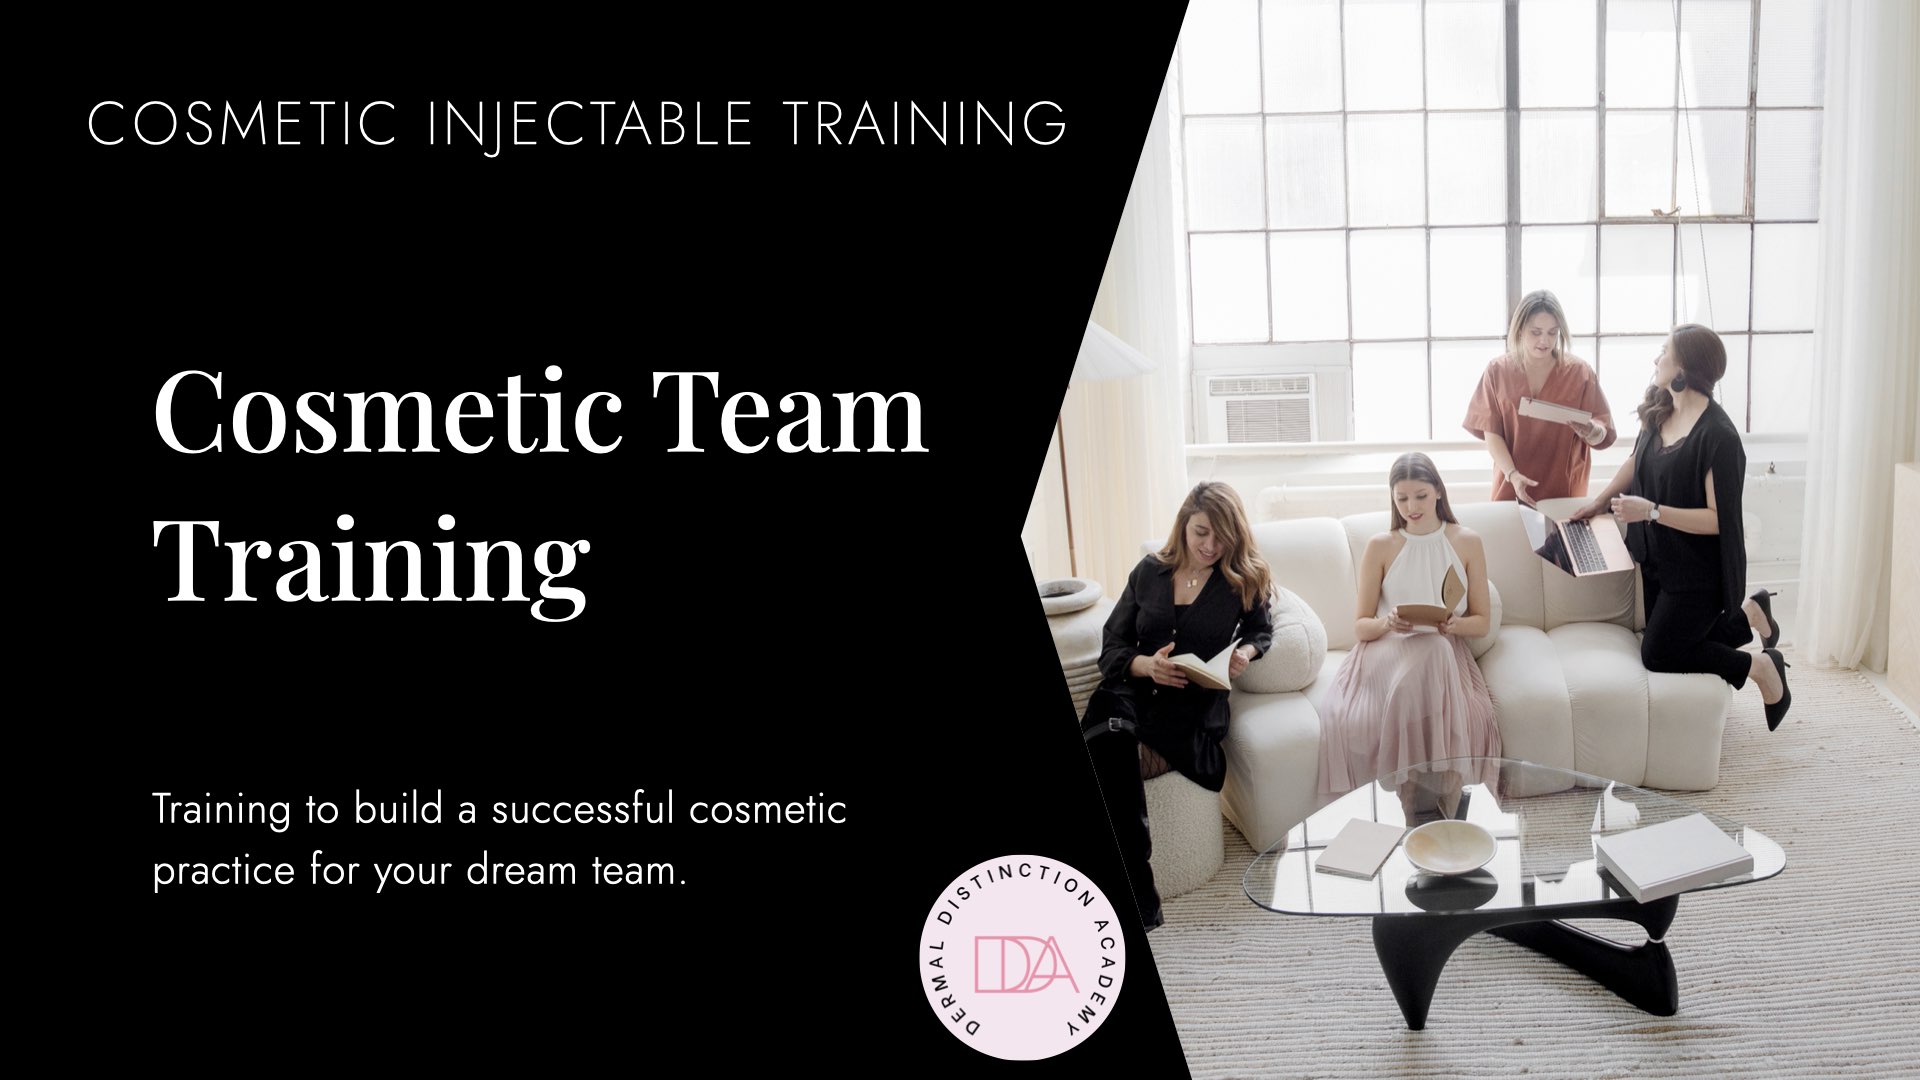 ESSENTIAL PRIVATE COSMETIC INJECTABLE TRAINING COURSE